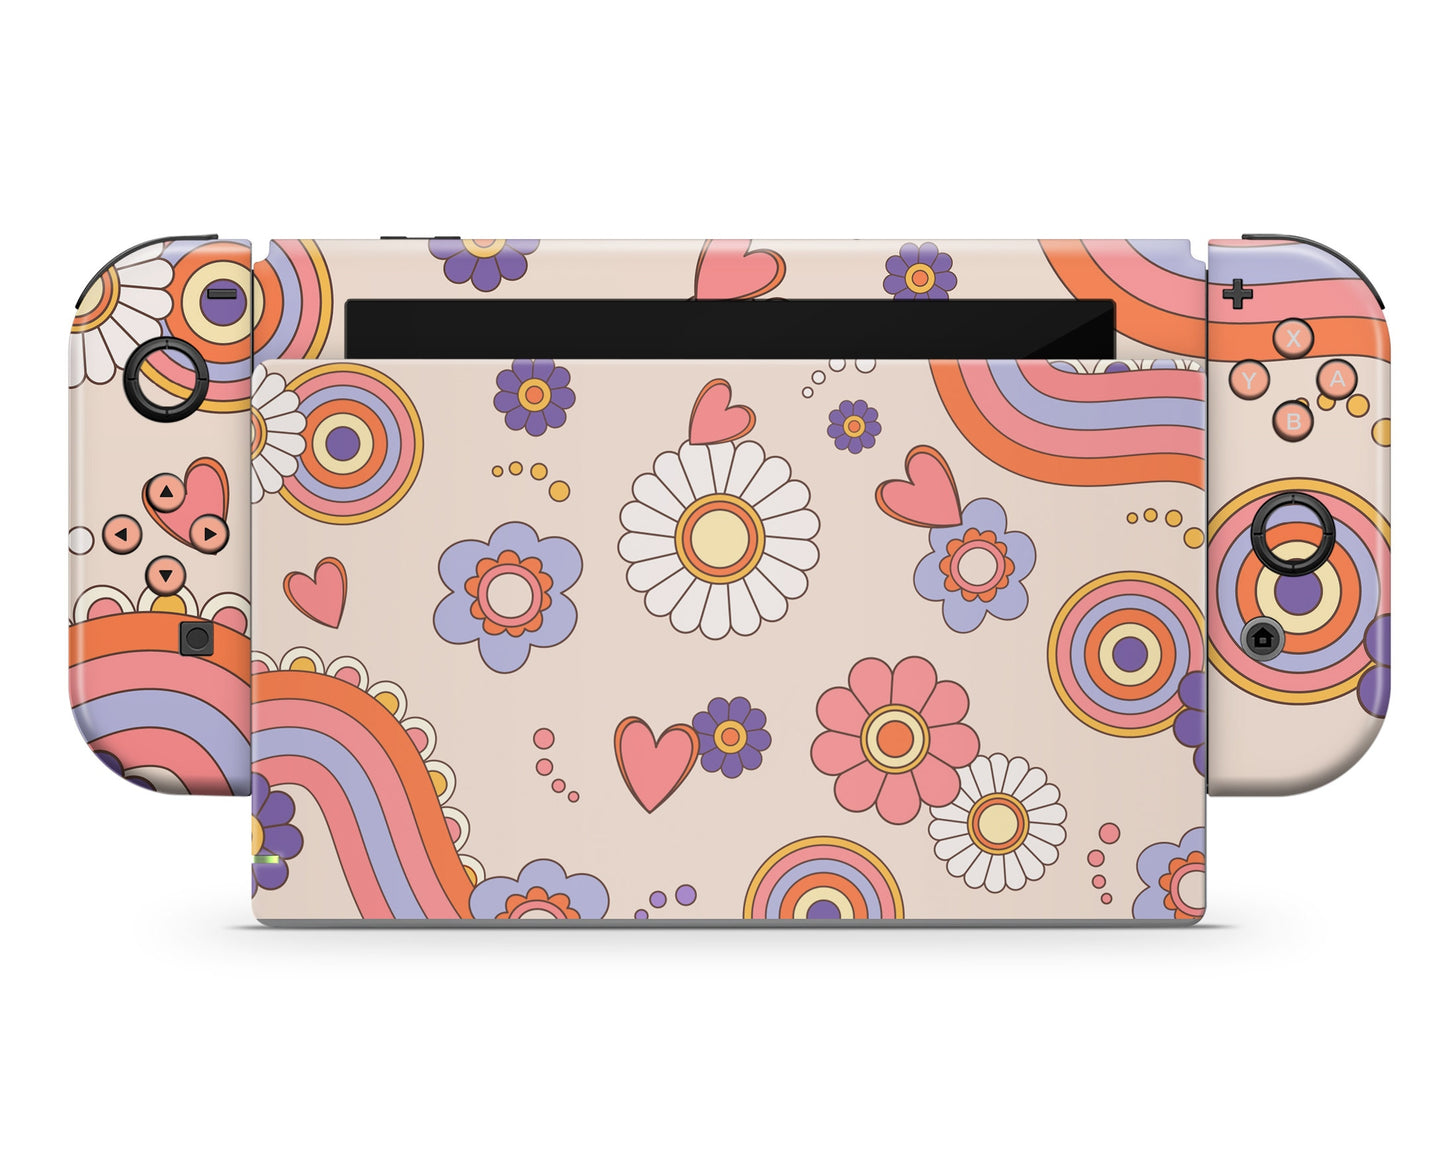 70s Groovy Floral Nintendo Switch Skin